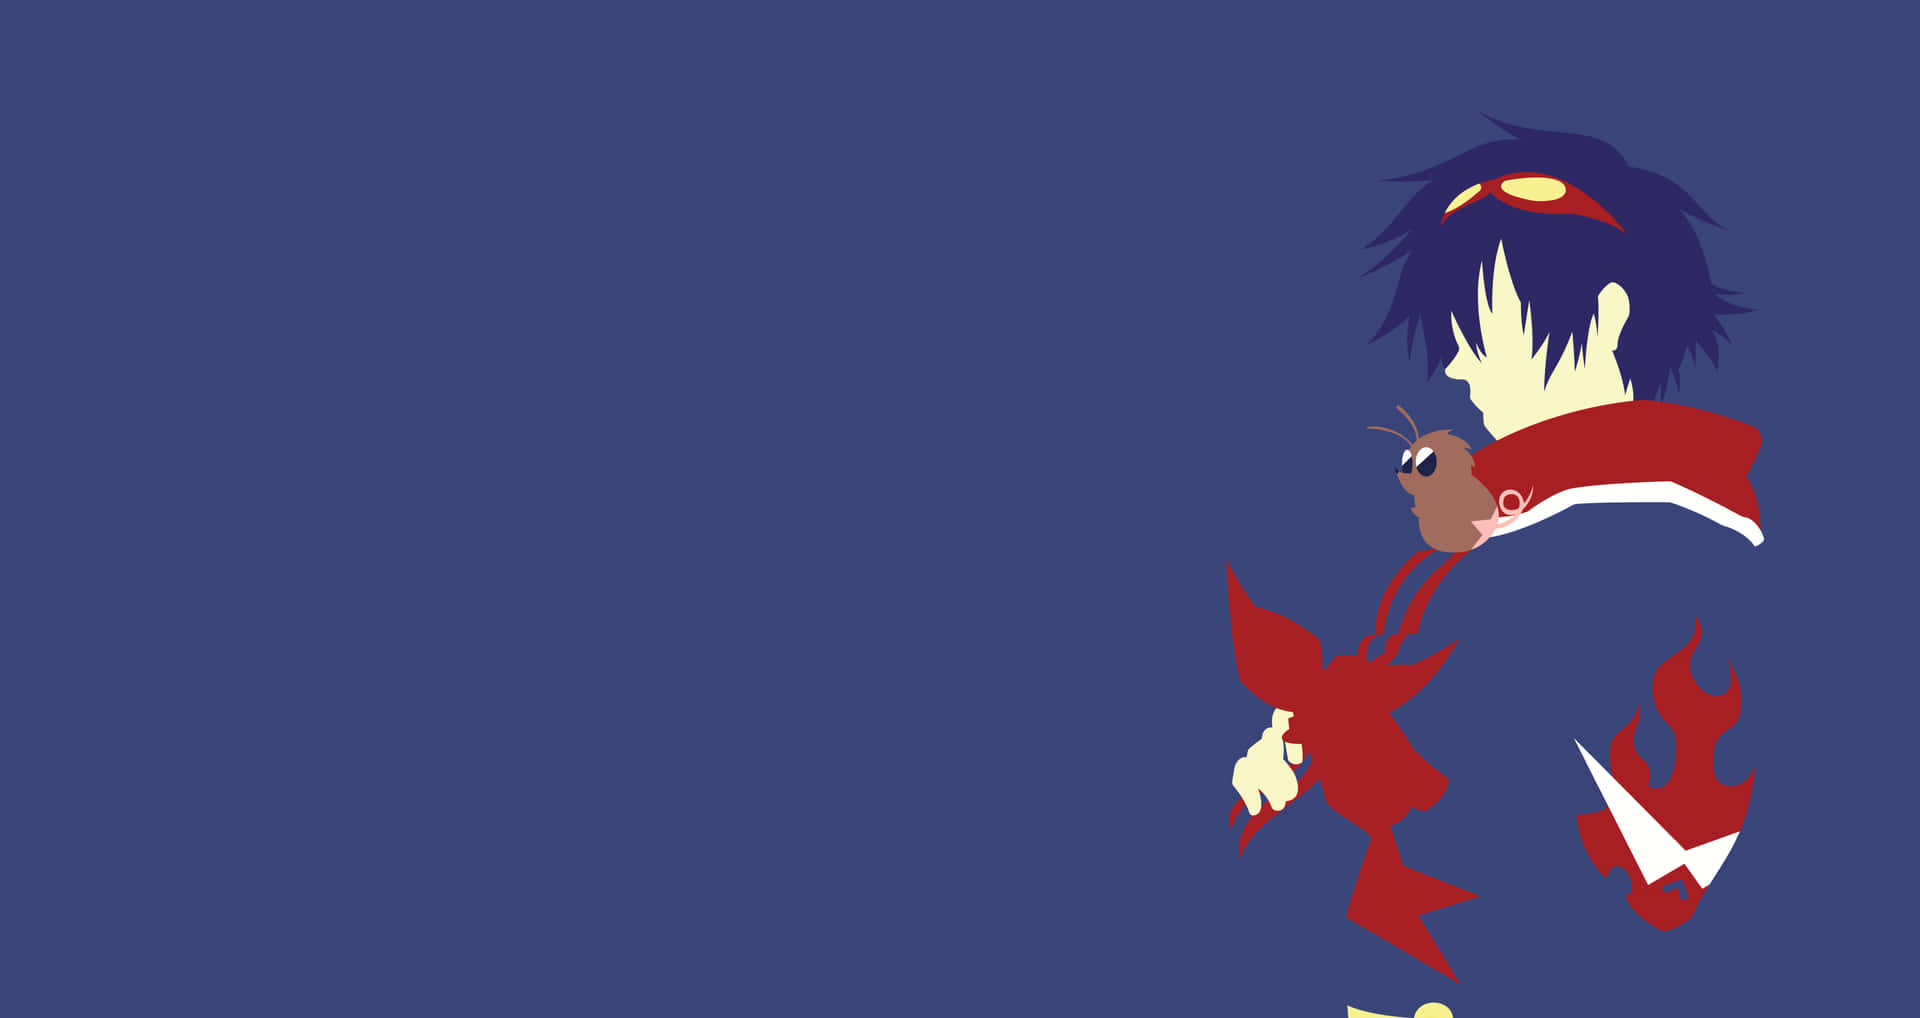 Simon stands tall in his signature outfit surrounded by an epic spiral of power in the world of Gurren Lagann. Wallpaper